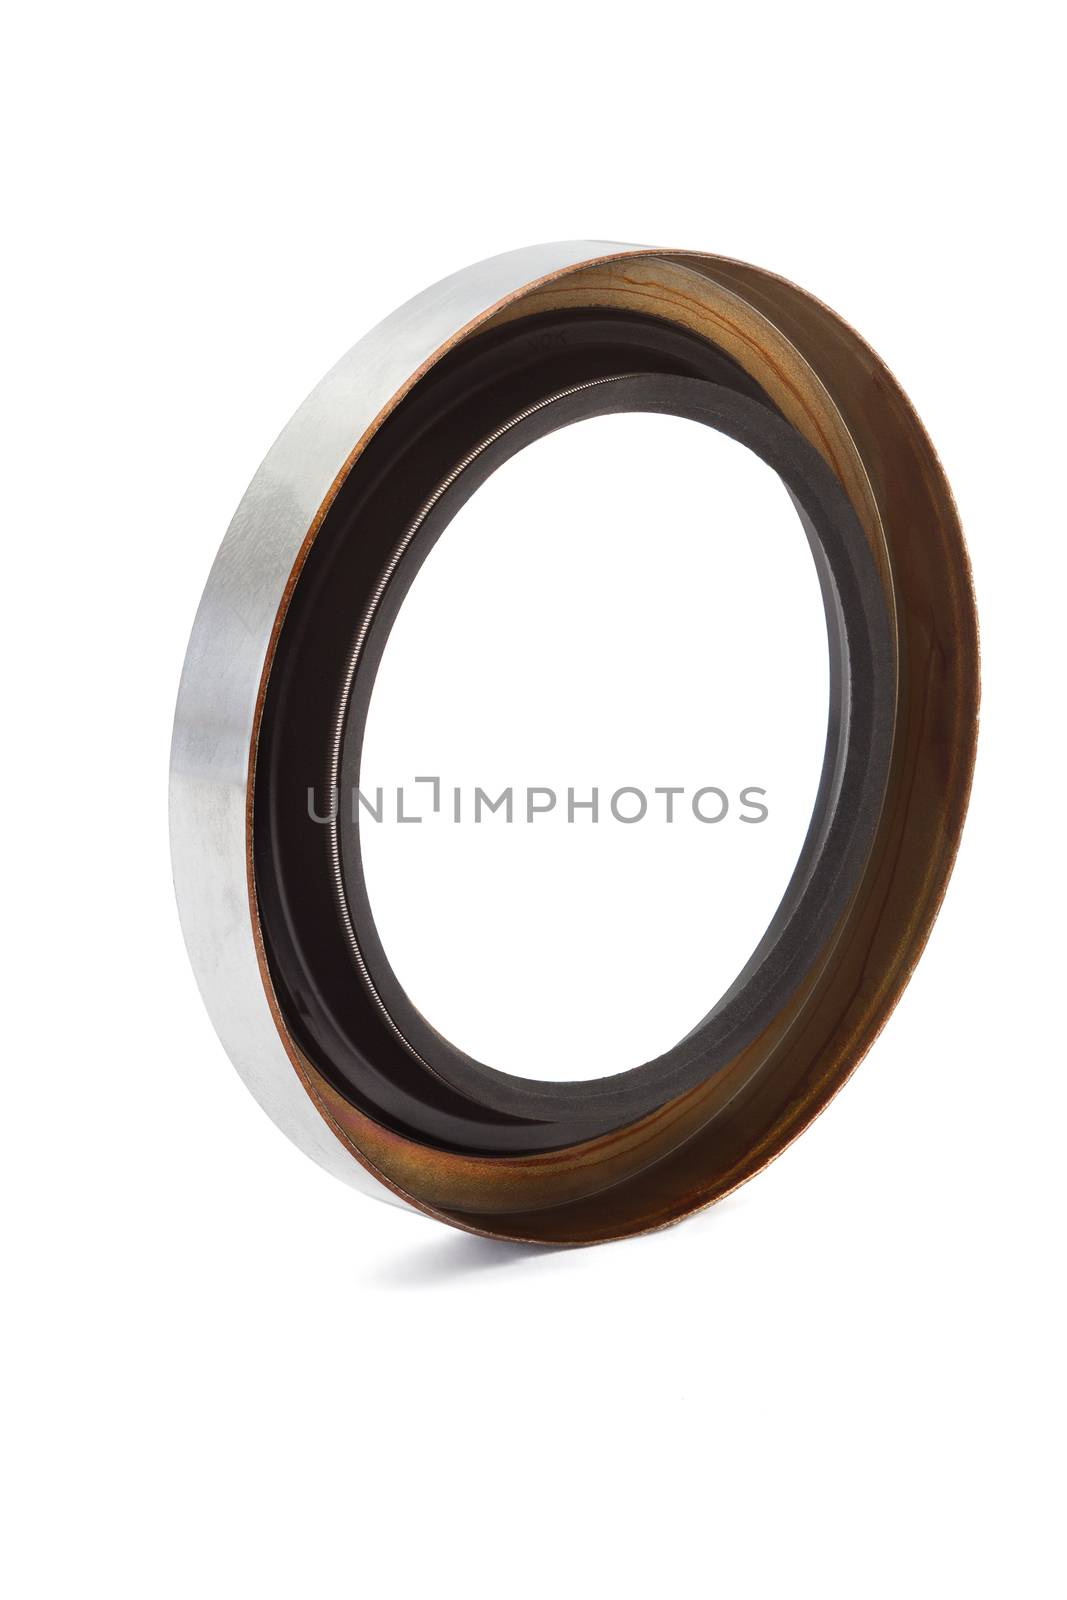 Oil seal isolated on white background